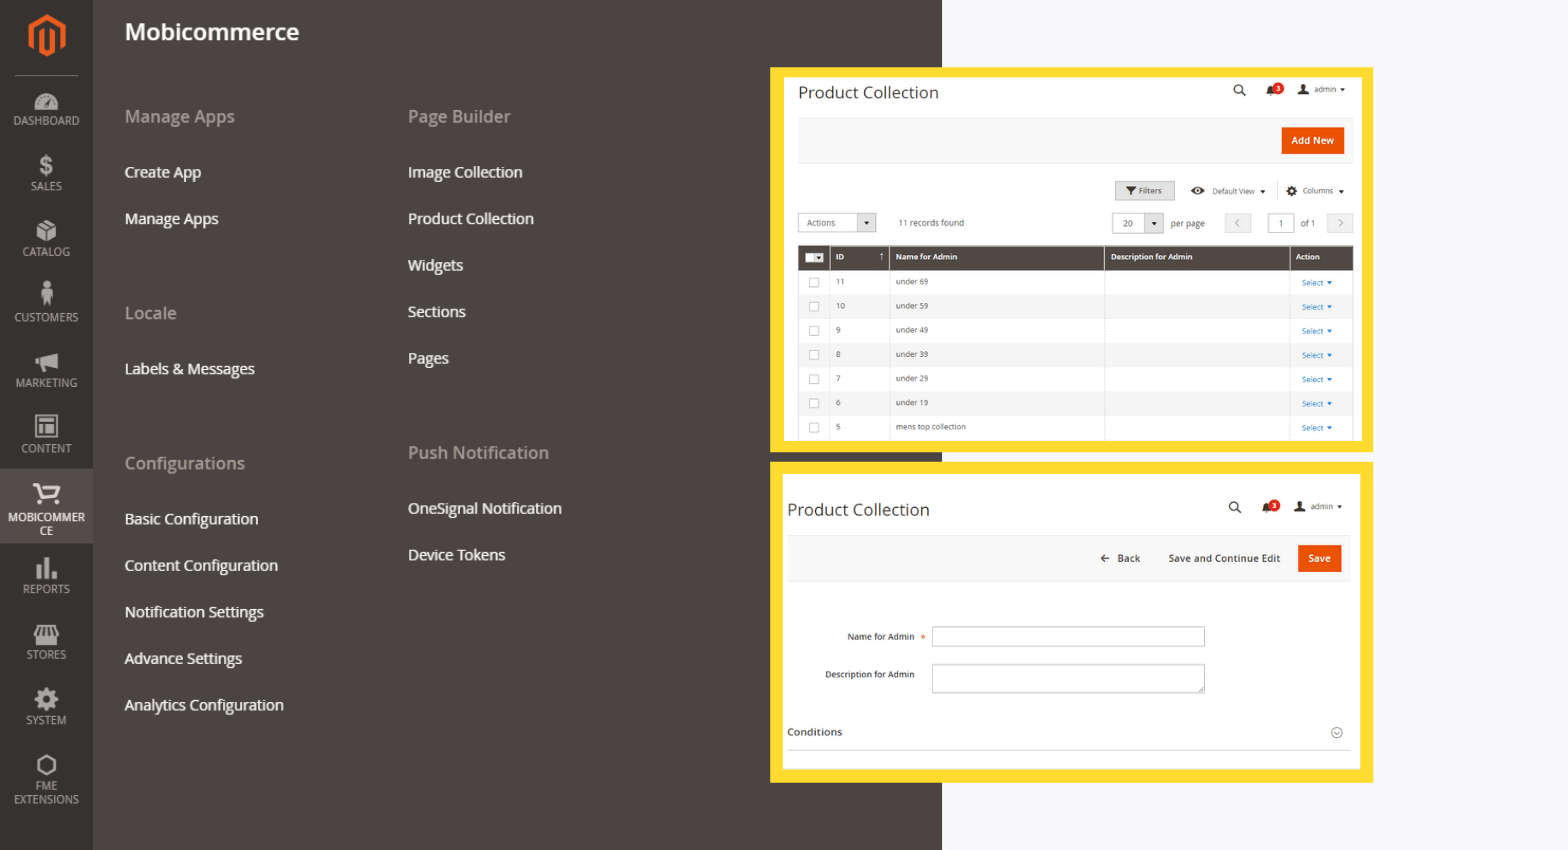 A Magento Native UI offering seamless usability for the admin